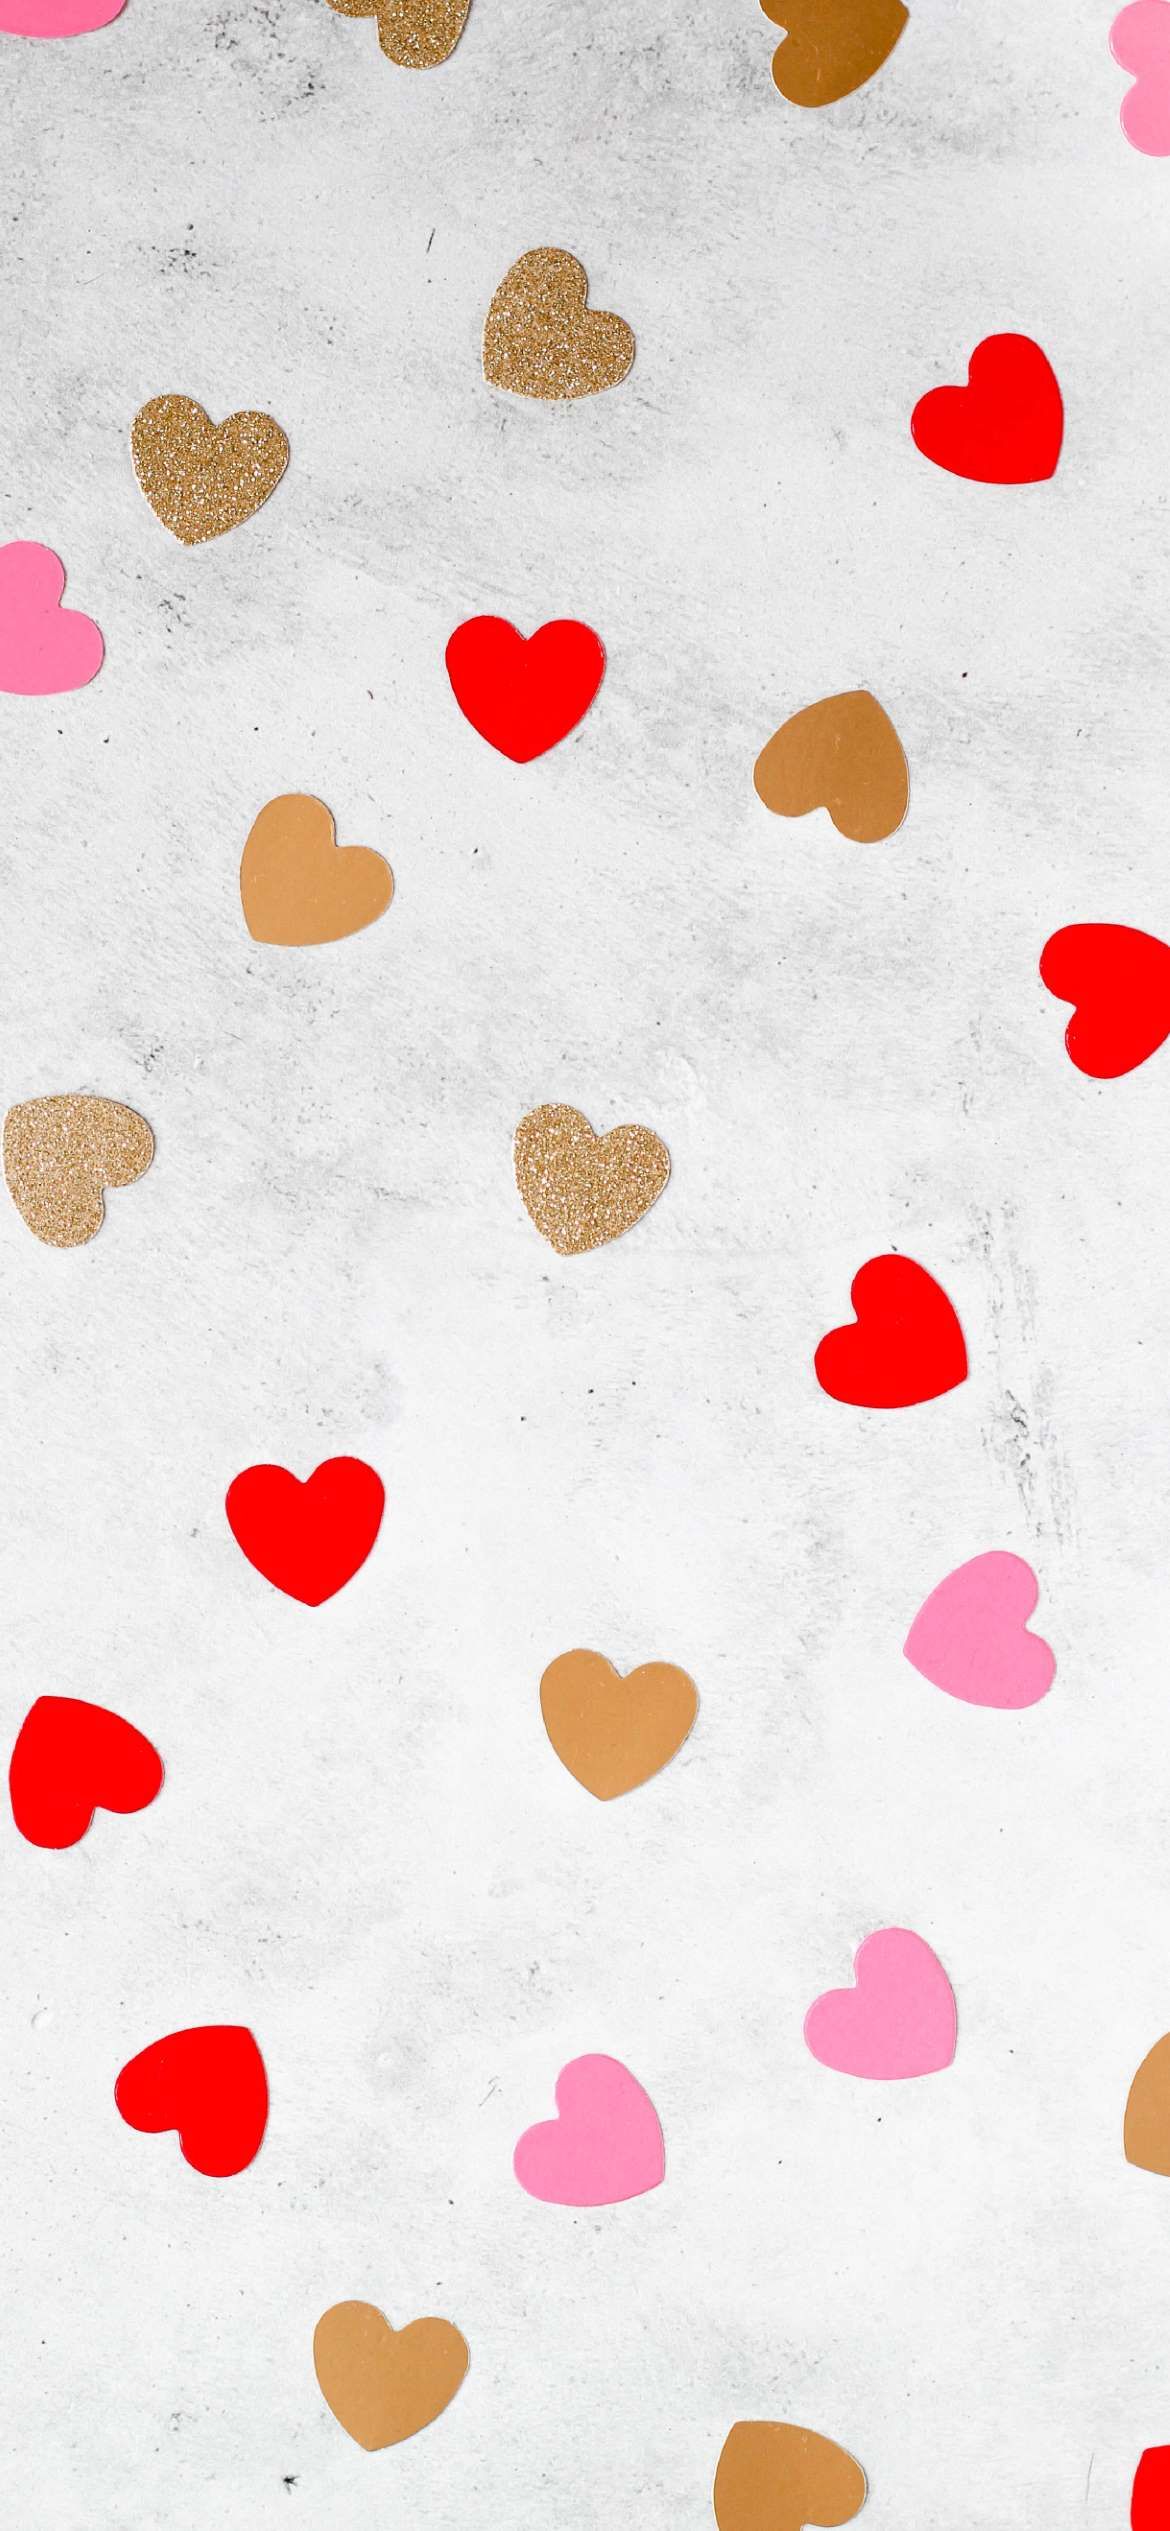 A Valentine's Day phone wallpaper with red, pink, and gold glitter hearts on a white background. - Valentine's Day, pink heart, heart